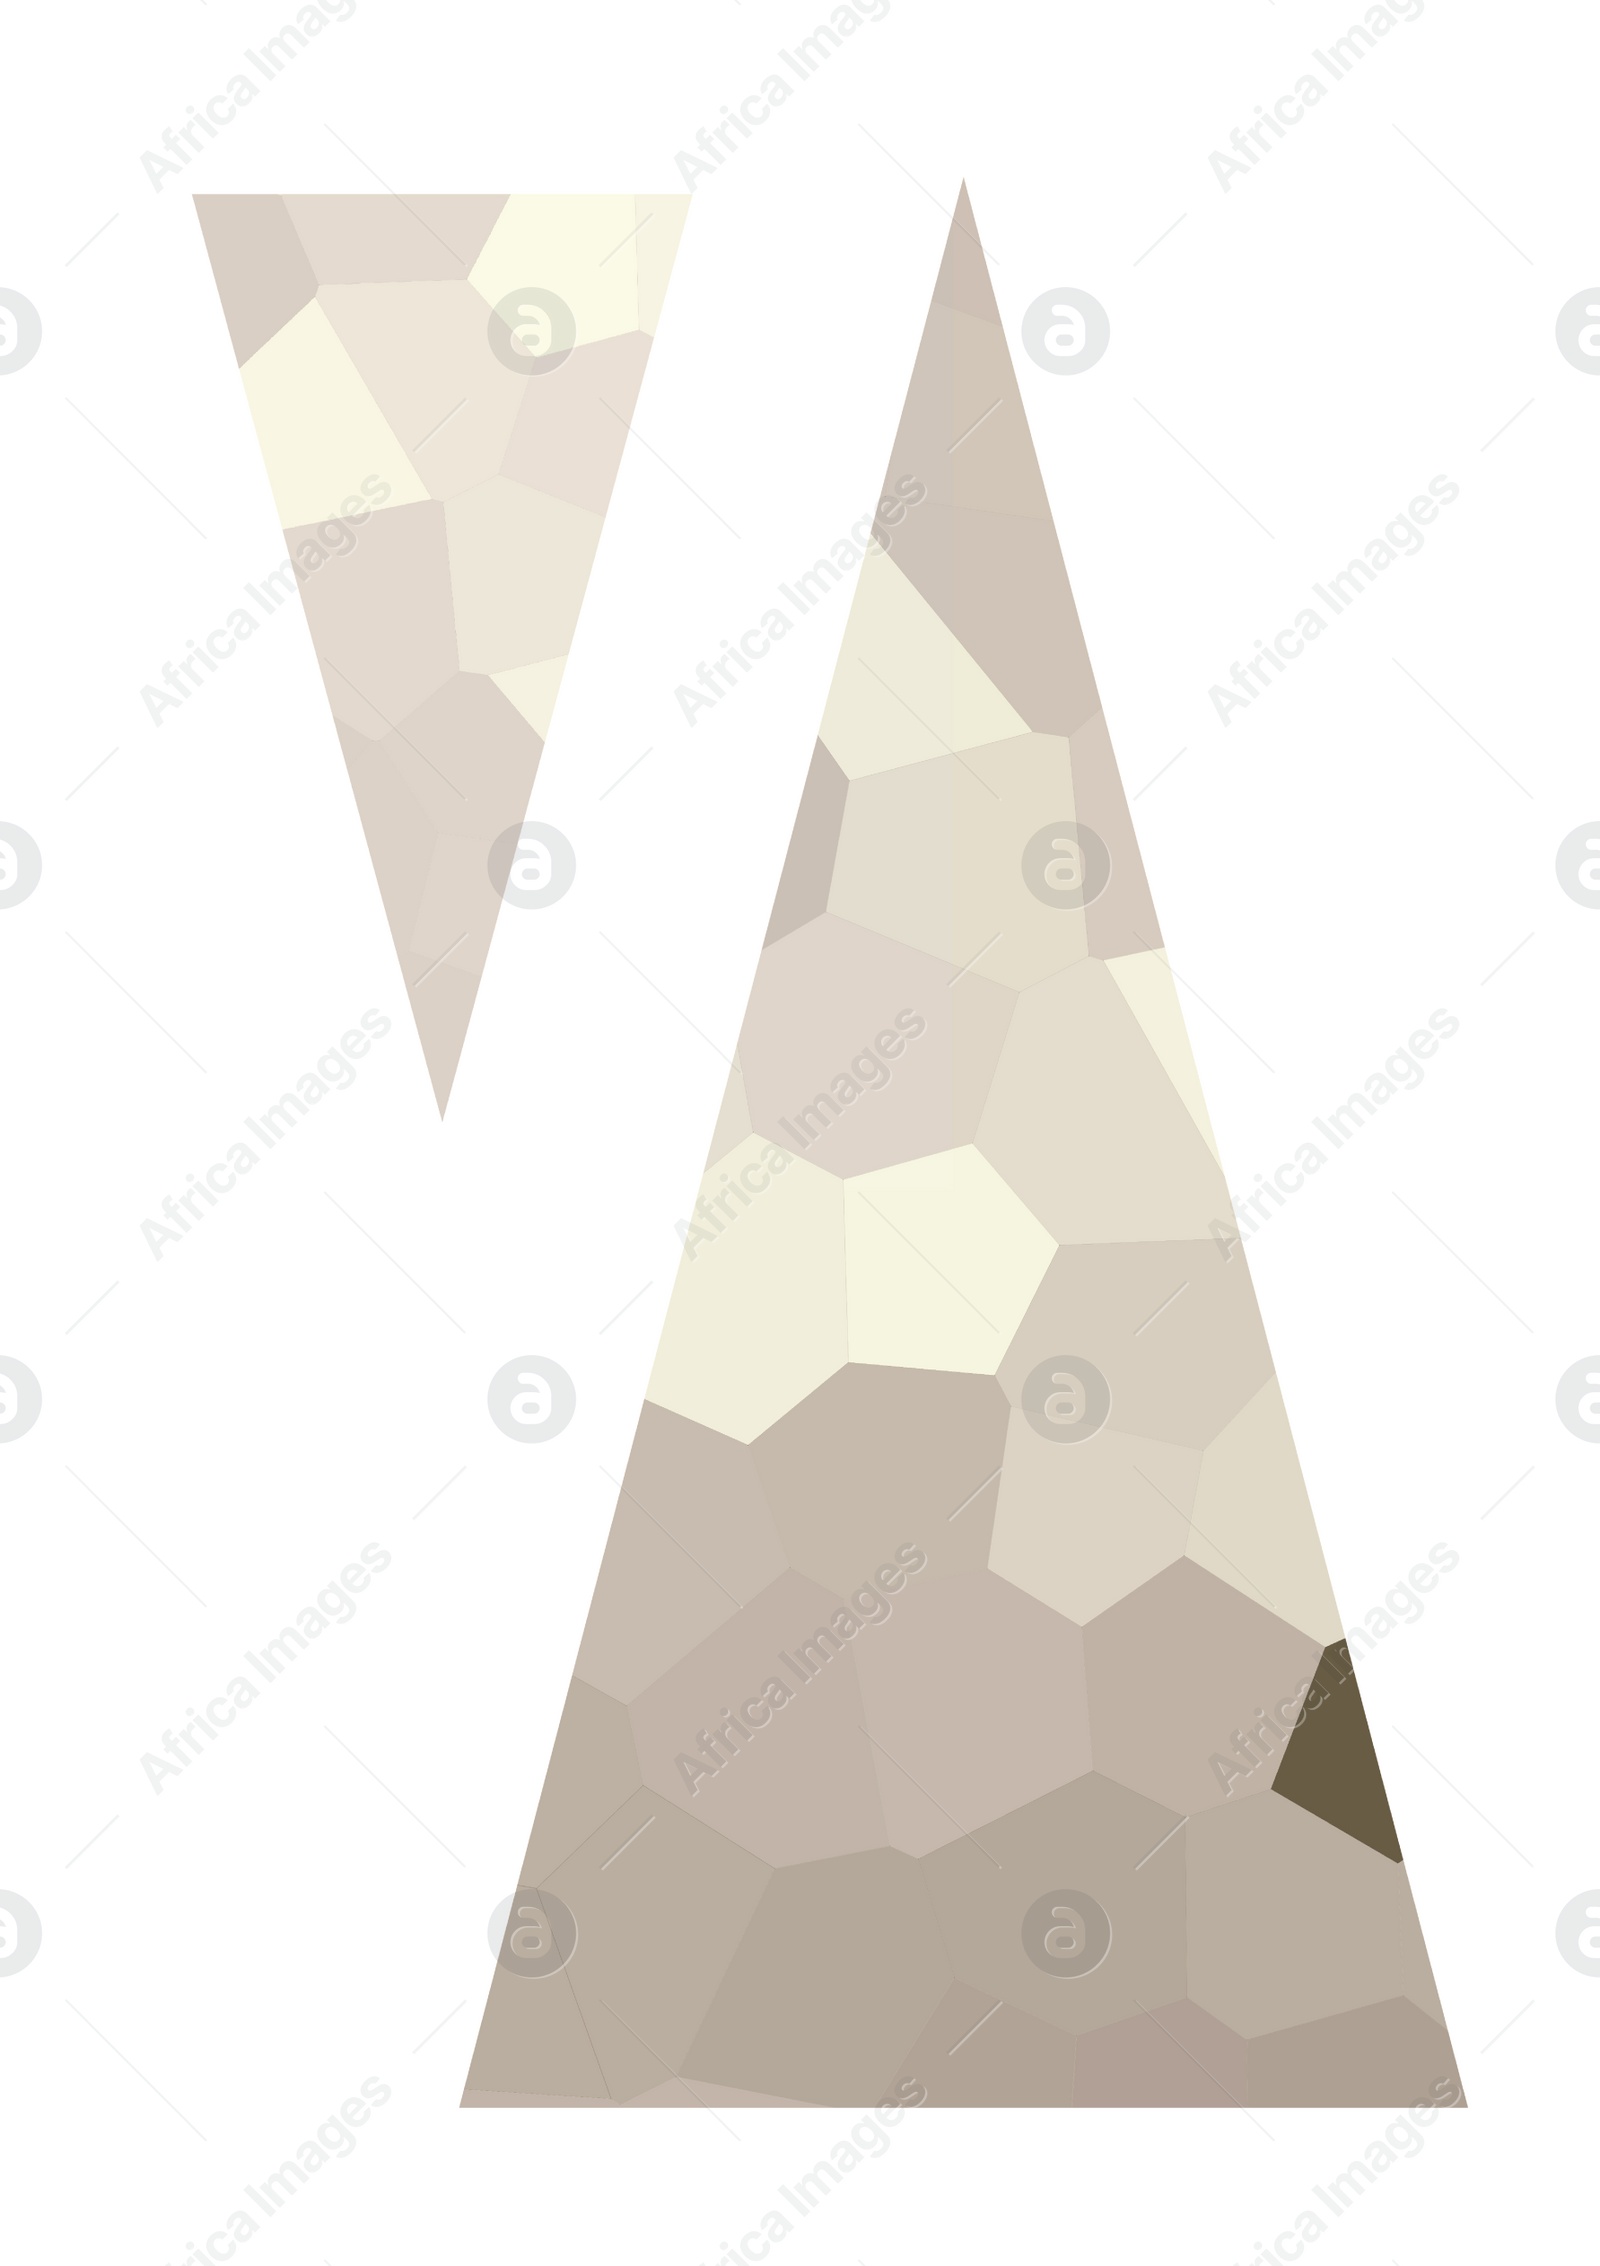 Illustration of Two triangles with geometric pattern on white background. Abstract image